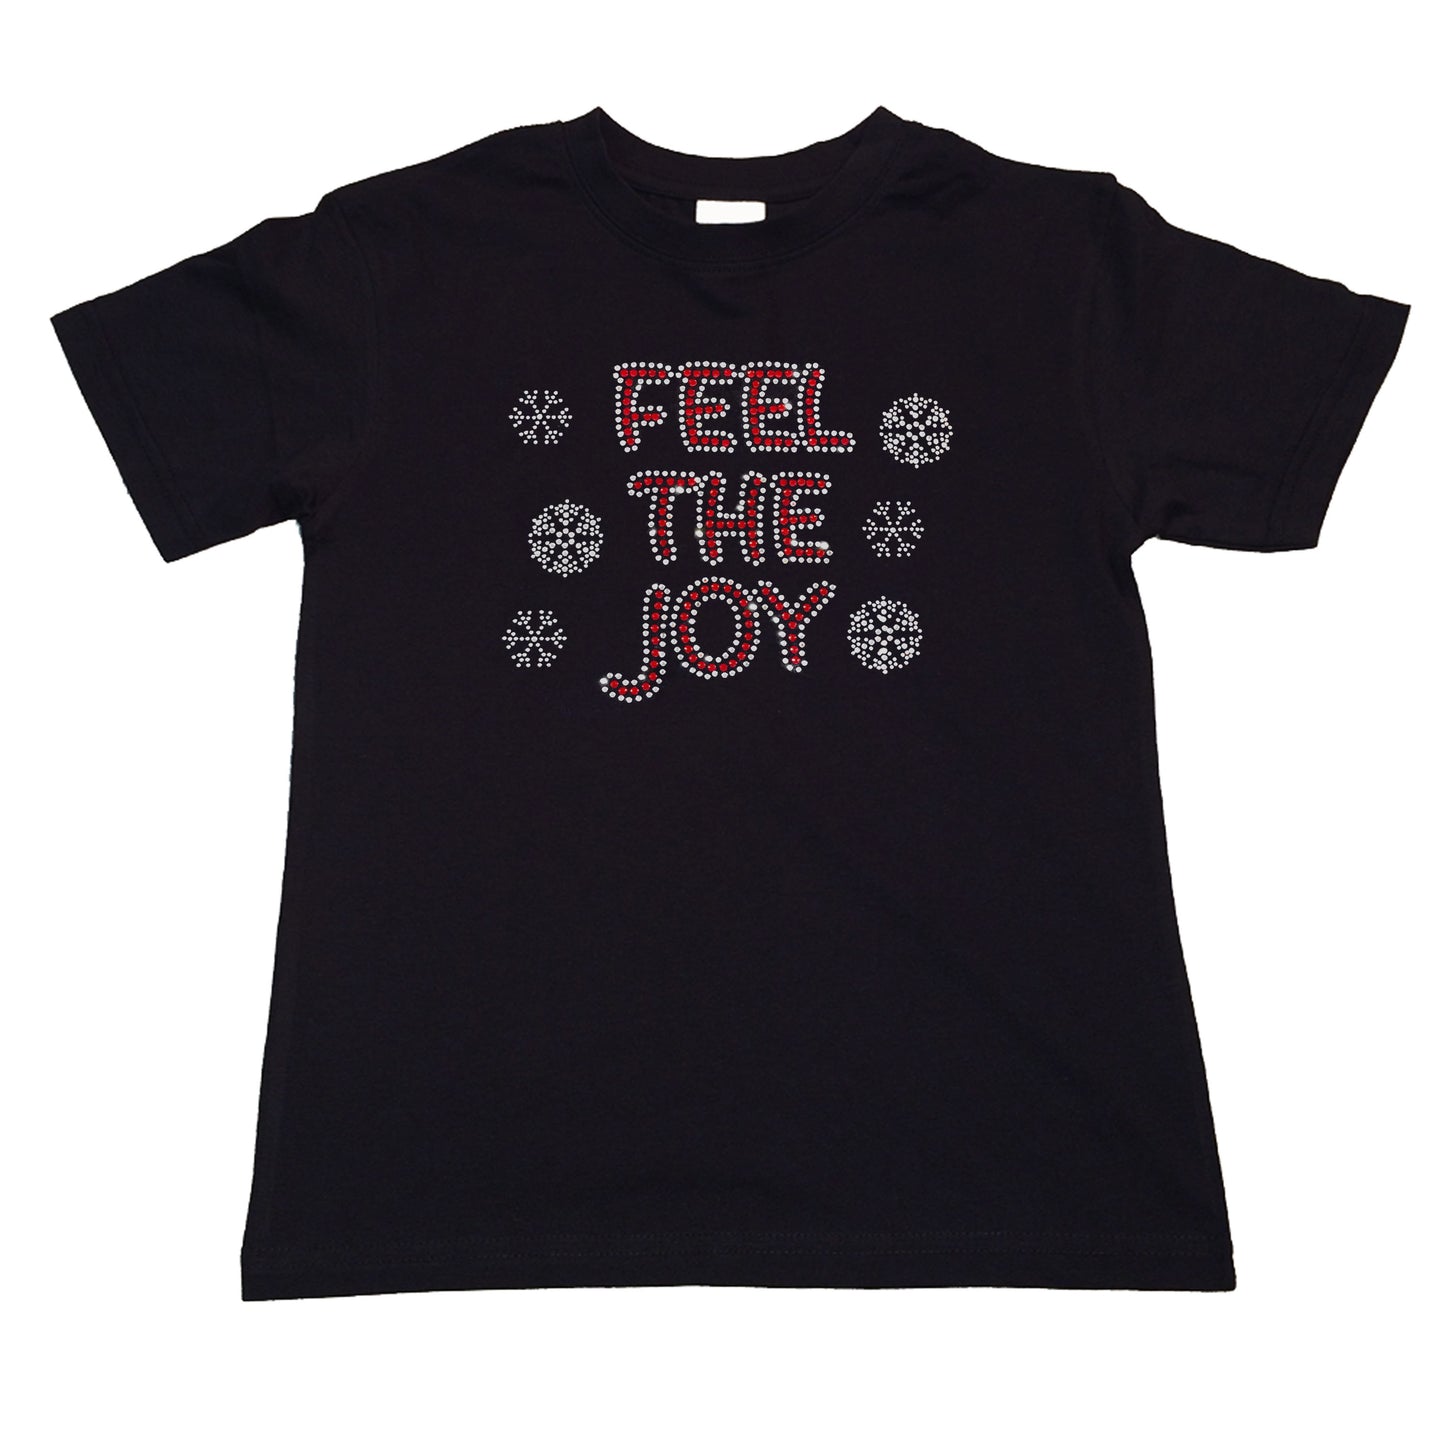 Girls Rhinestone T-Shirt " Feel the Joy with Snowflakes Christmas in Rhinestones " Kids Size 3 to 14 Available